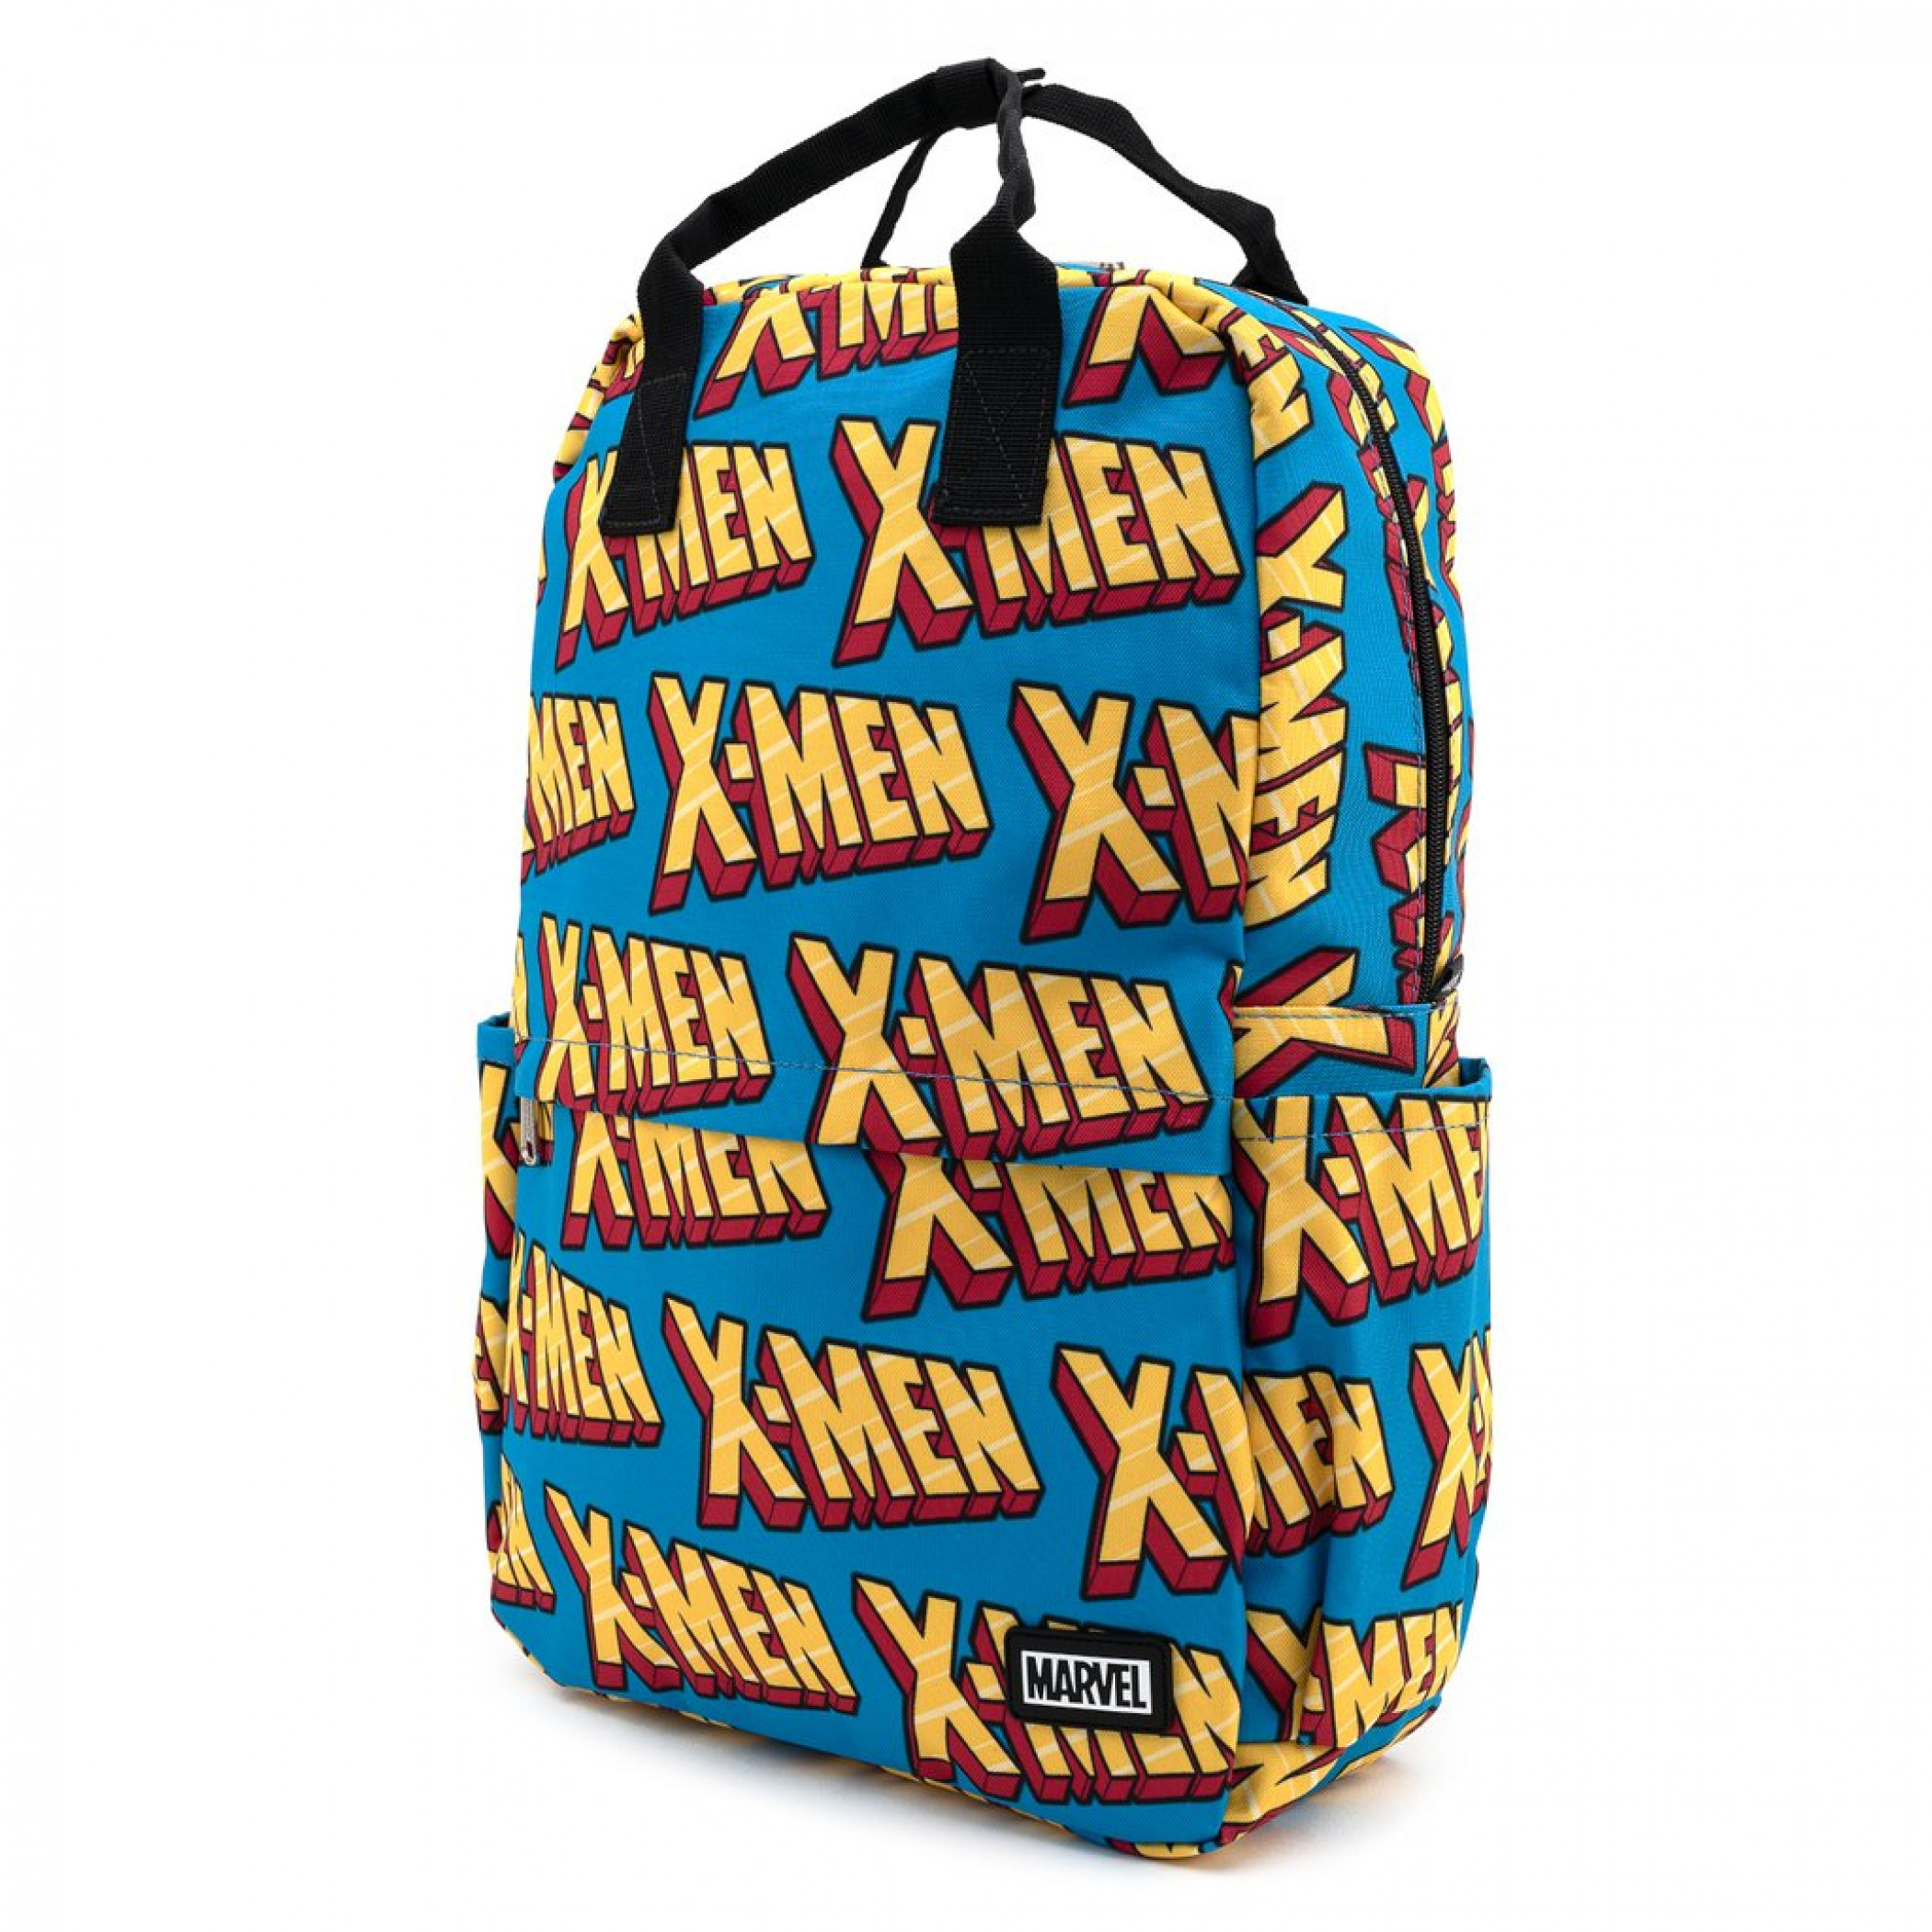 X-Men Logo All Over Print Nylon Backpack by Loungefly